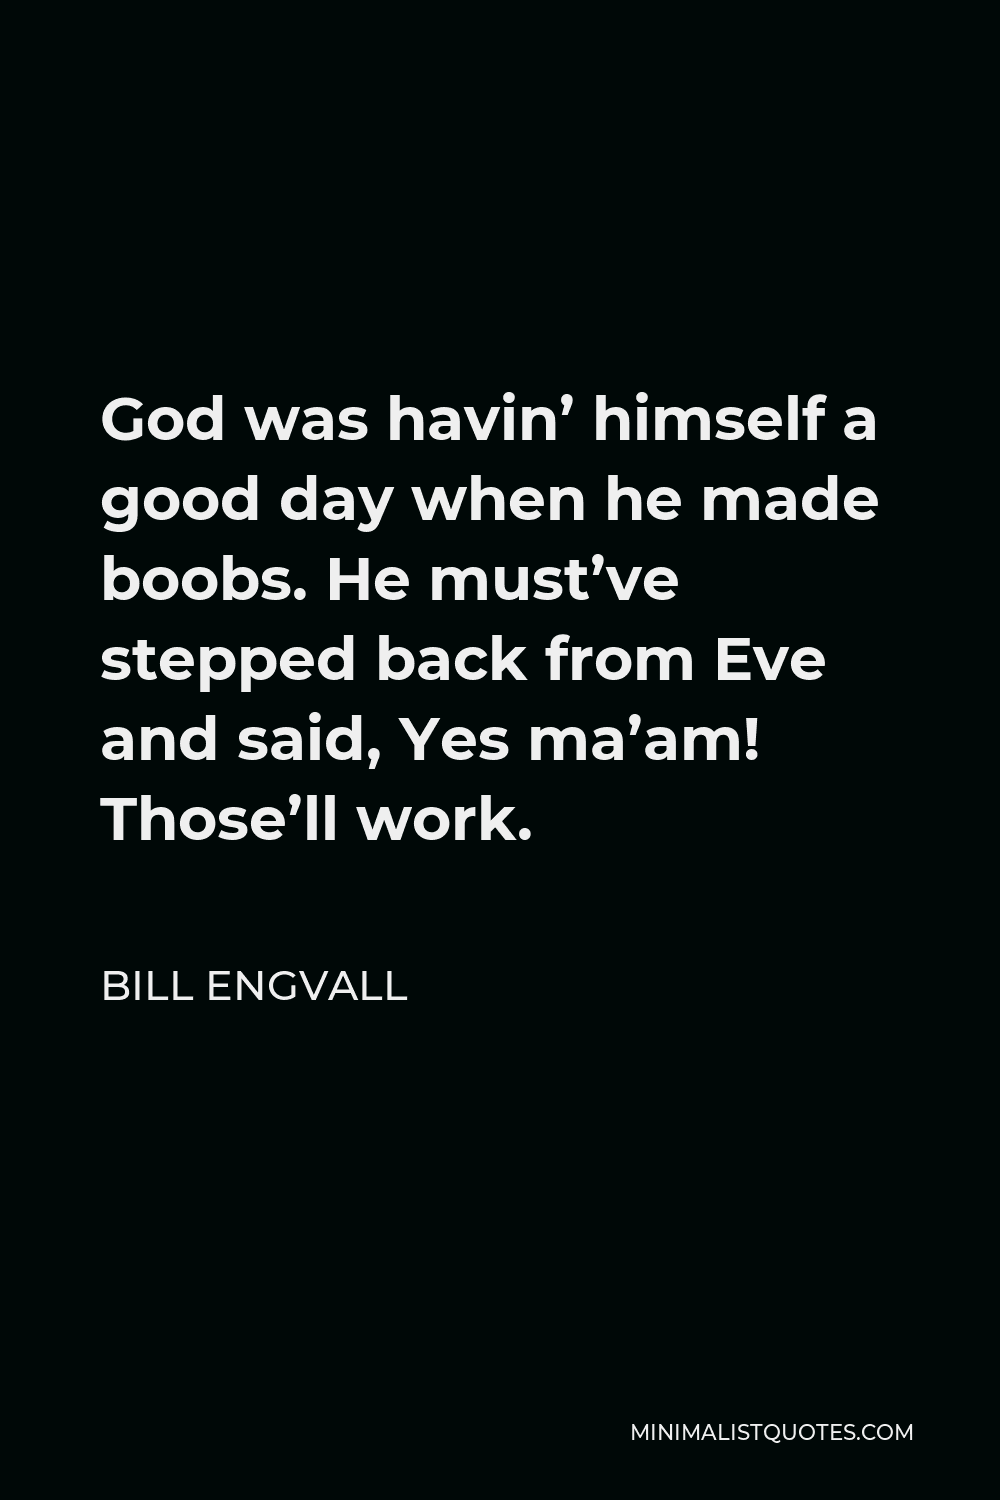 Bill Engvall Quote - God was havin’ himself a good day when he made boobs. He must’ve stepped back from Eve and said, Yes ma’am! Those’ll work.